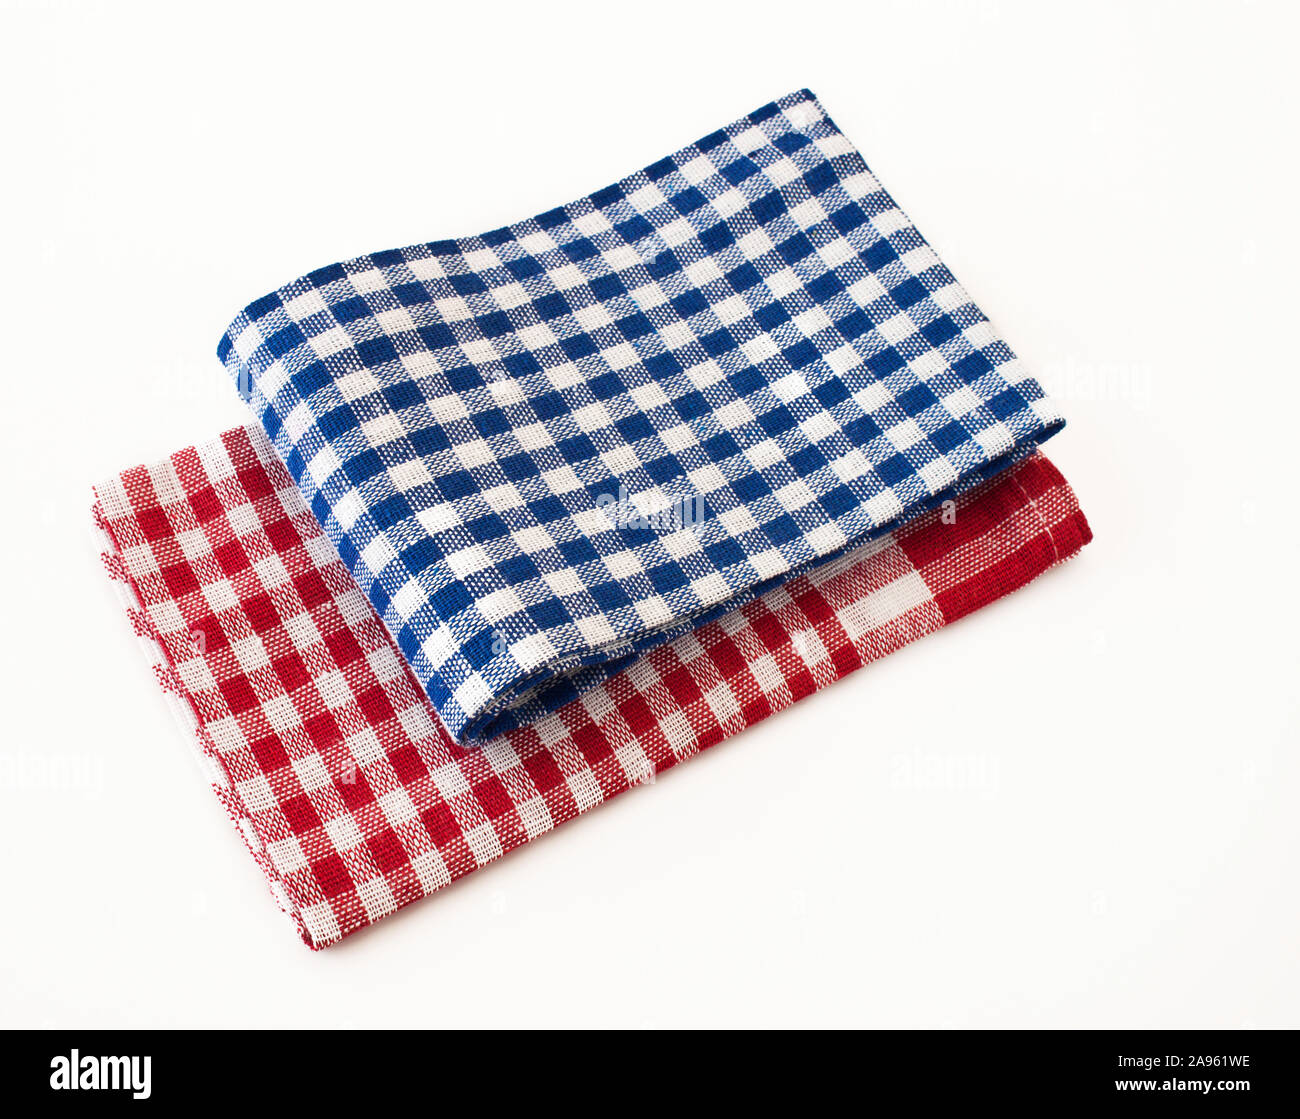 https://c8.alamy.com/comp/2A961WE/kitchen-towels-against-white-background-2A961WE.jpg